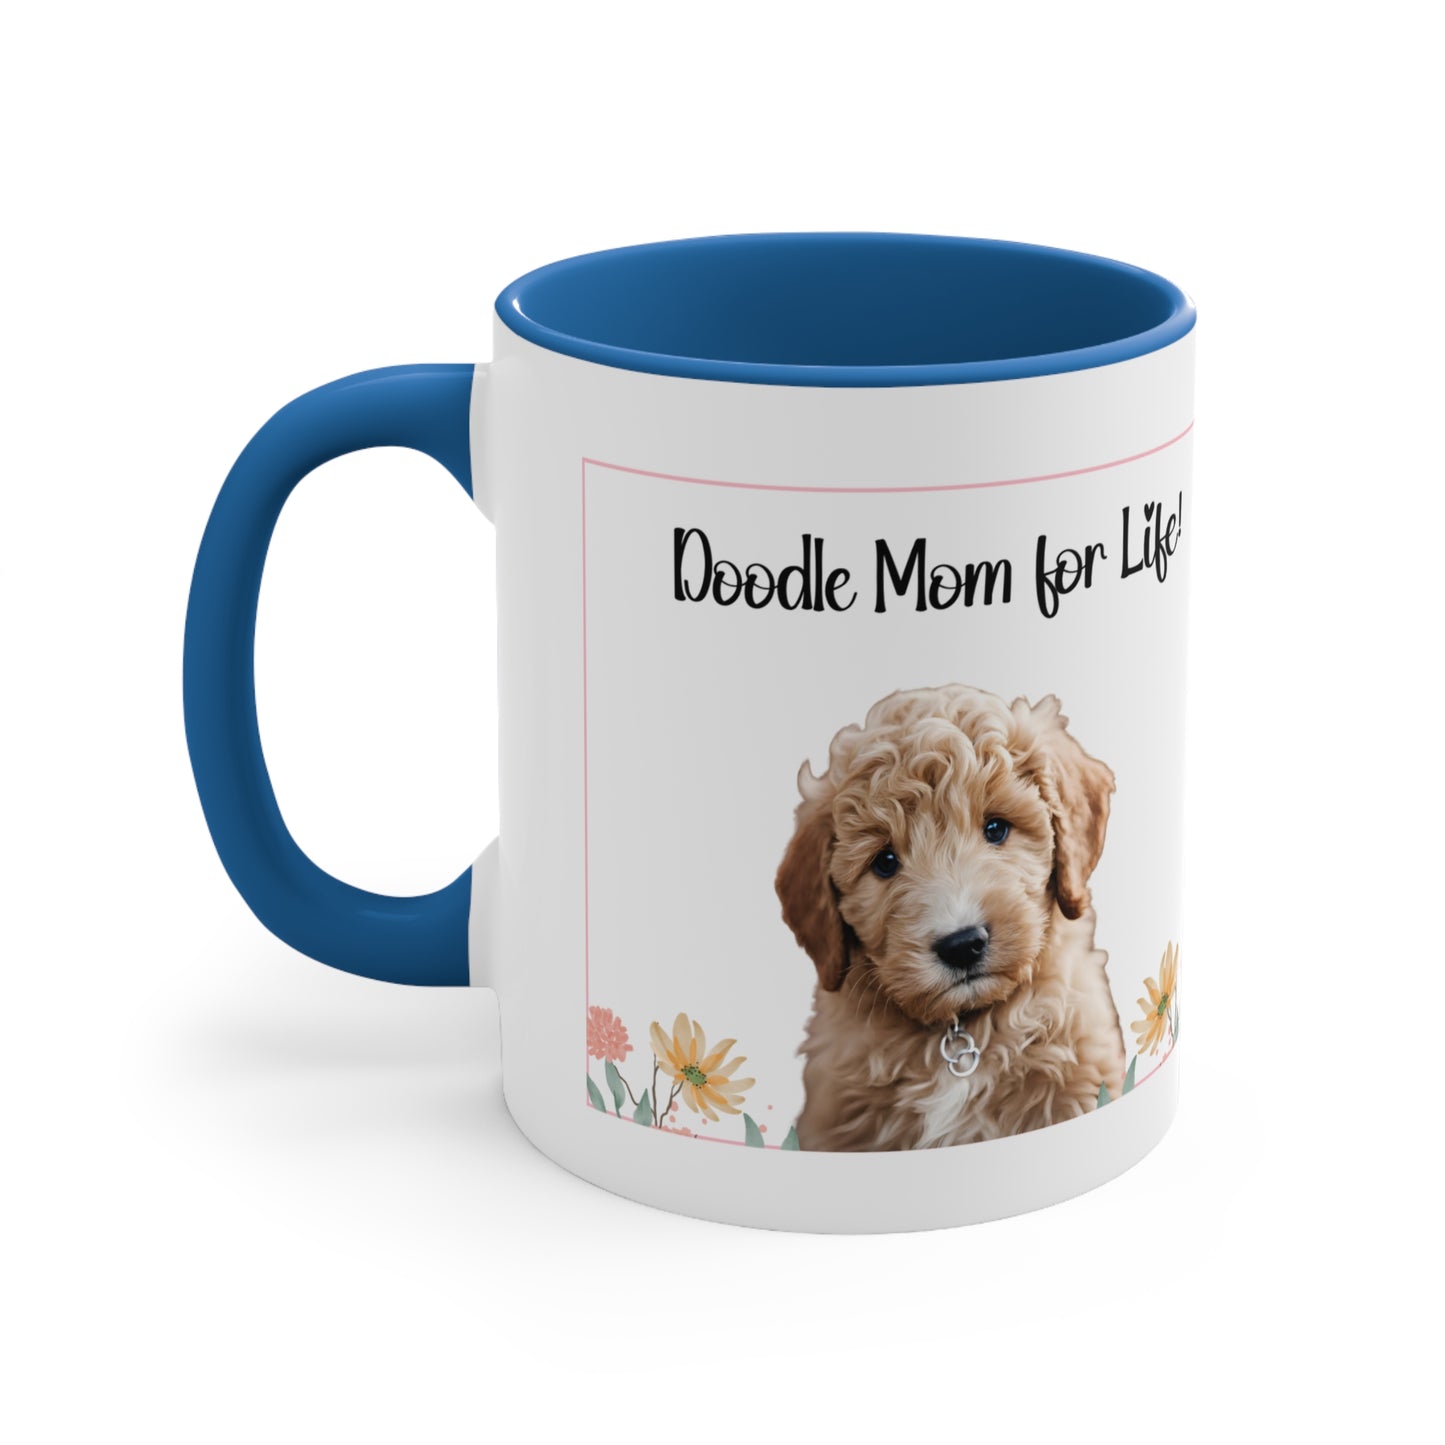 Golden doodle coffee mug, 11 oz hor gift or self, front view in blue.